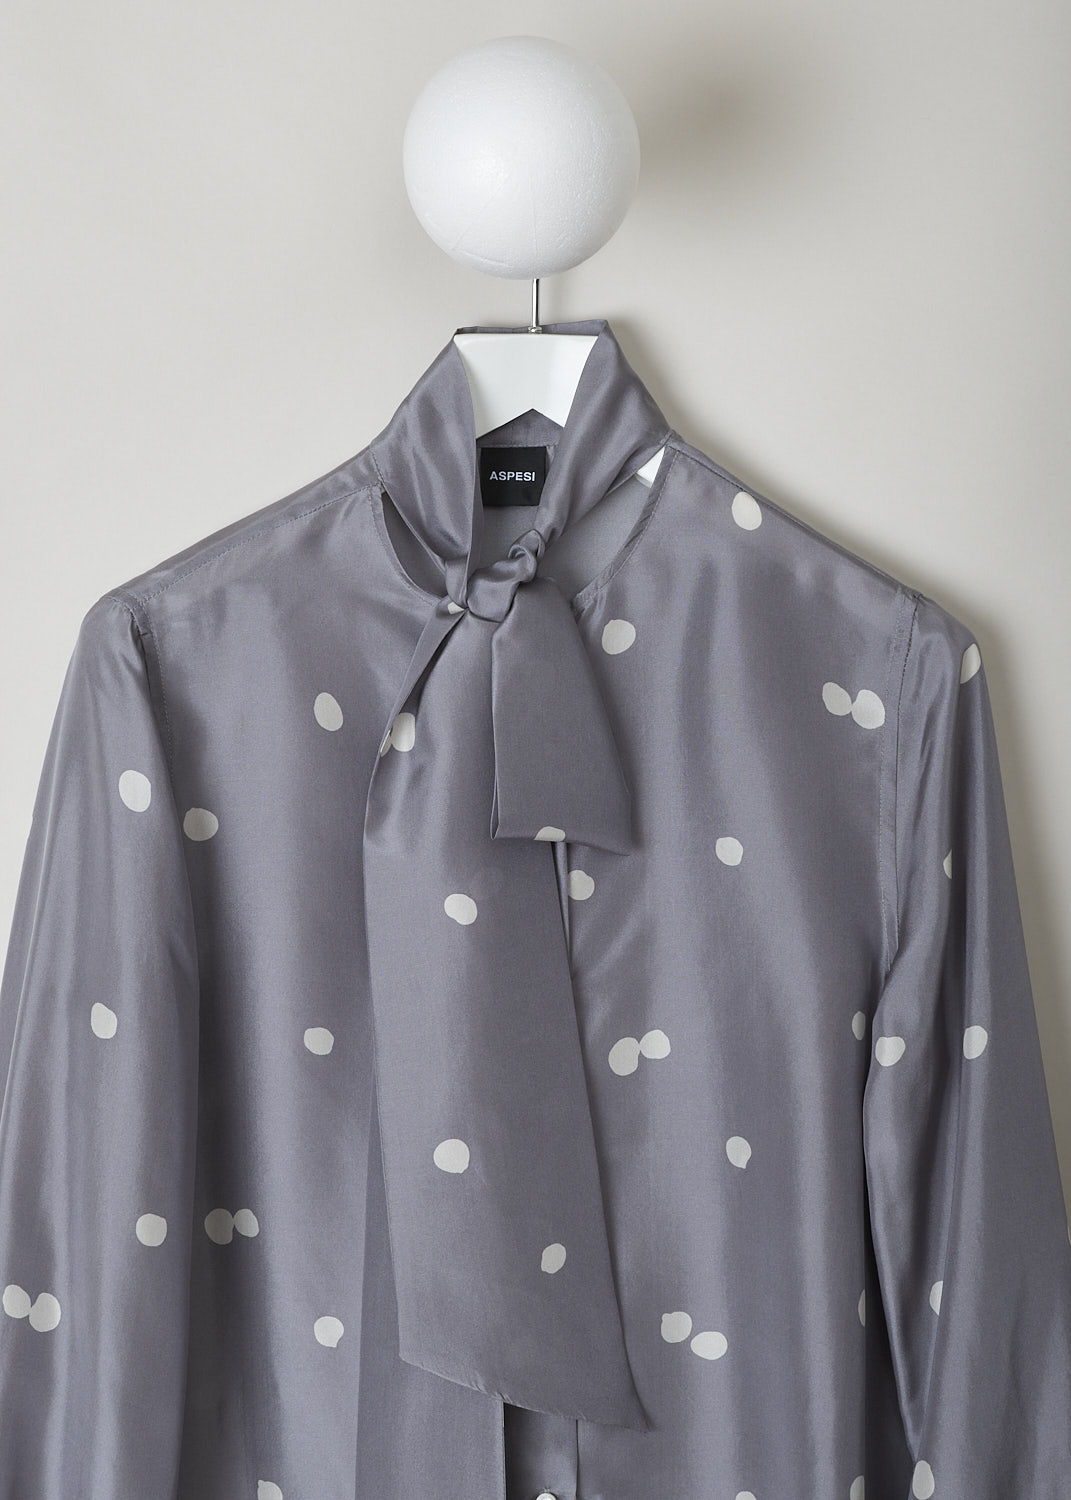 ASPESI, GREY SILK BLOUSE WITH PUSSY BOW, 5448_M278_62187, Grey, Print, Detail, This grey silk blouse has a pale grey dotted print. The blouse has a pussy bow collar and front button closure. The long bishop sleeves have elasticated cuffs. The blouse has a rounded hemline with small slits.
